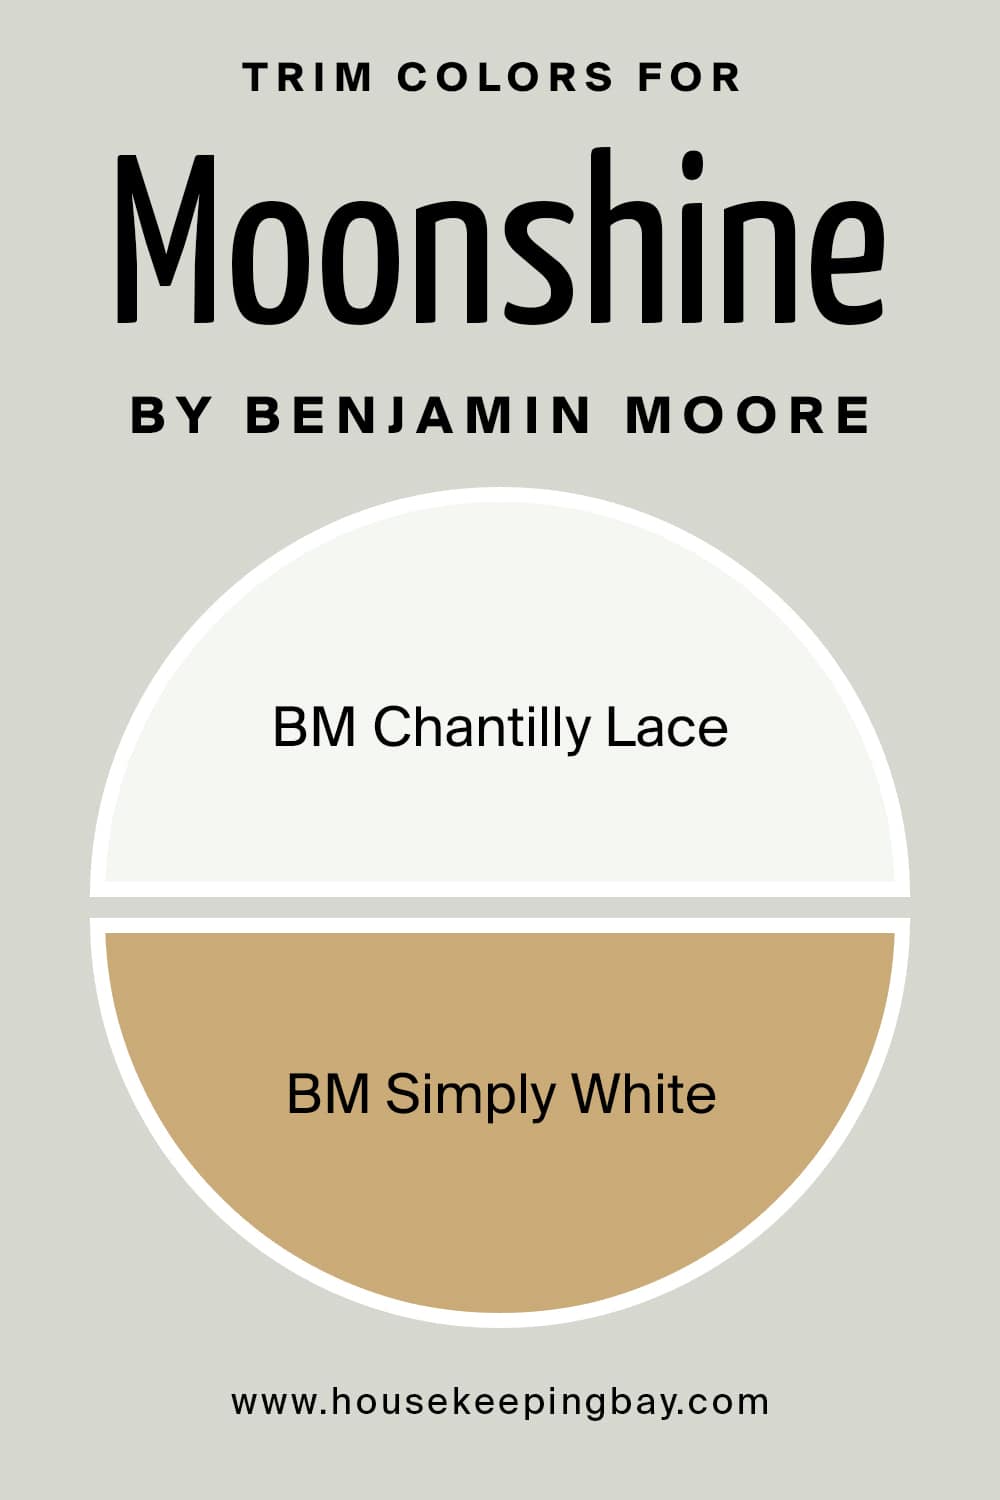 Trim Colors for Moonshine by Benjamin Moore